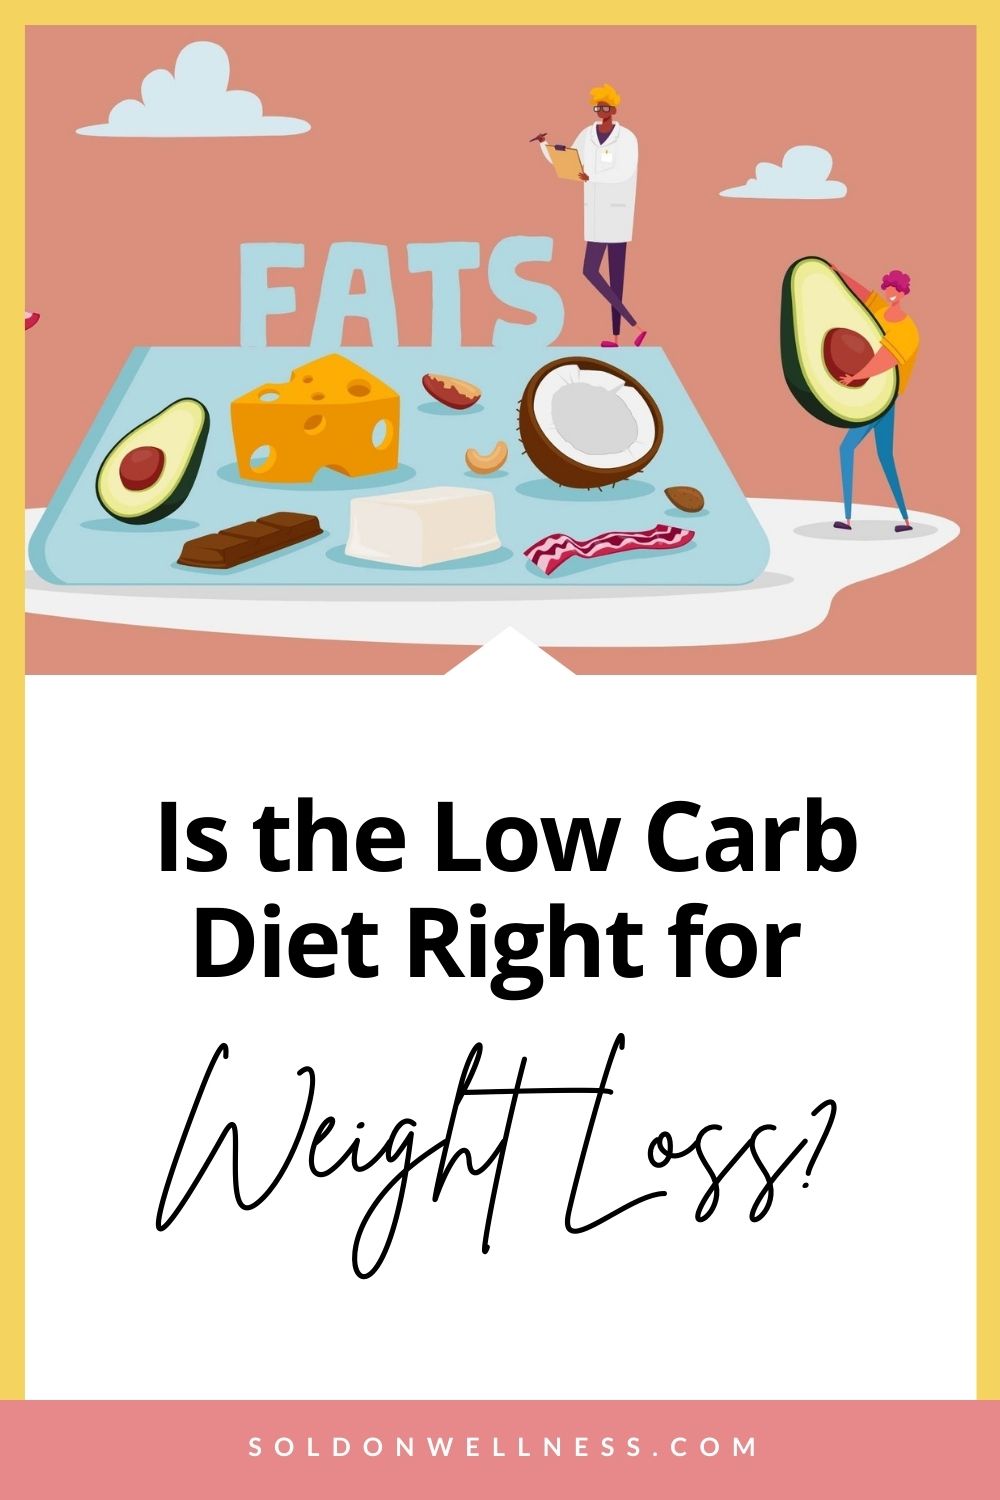 What is a low carb diet